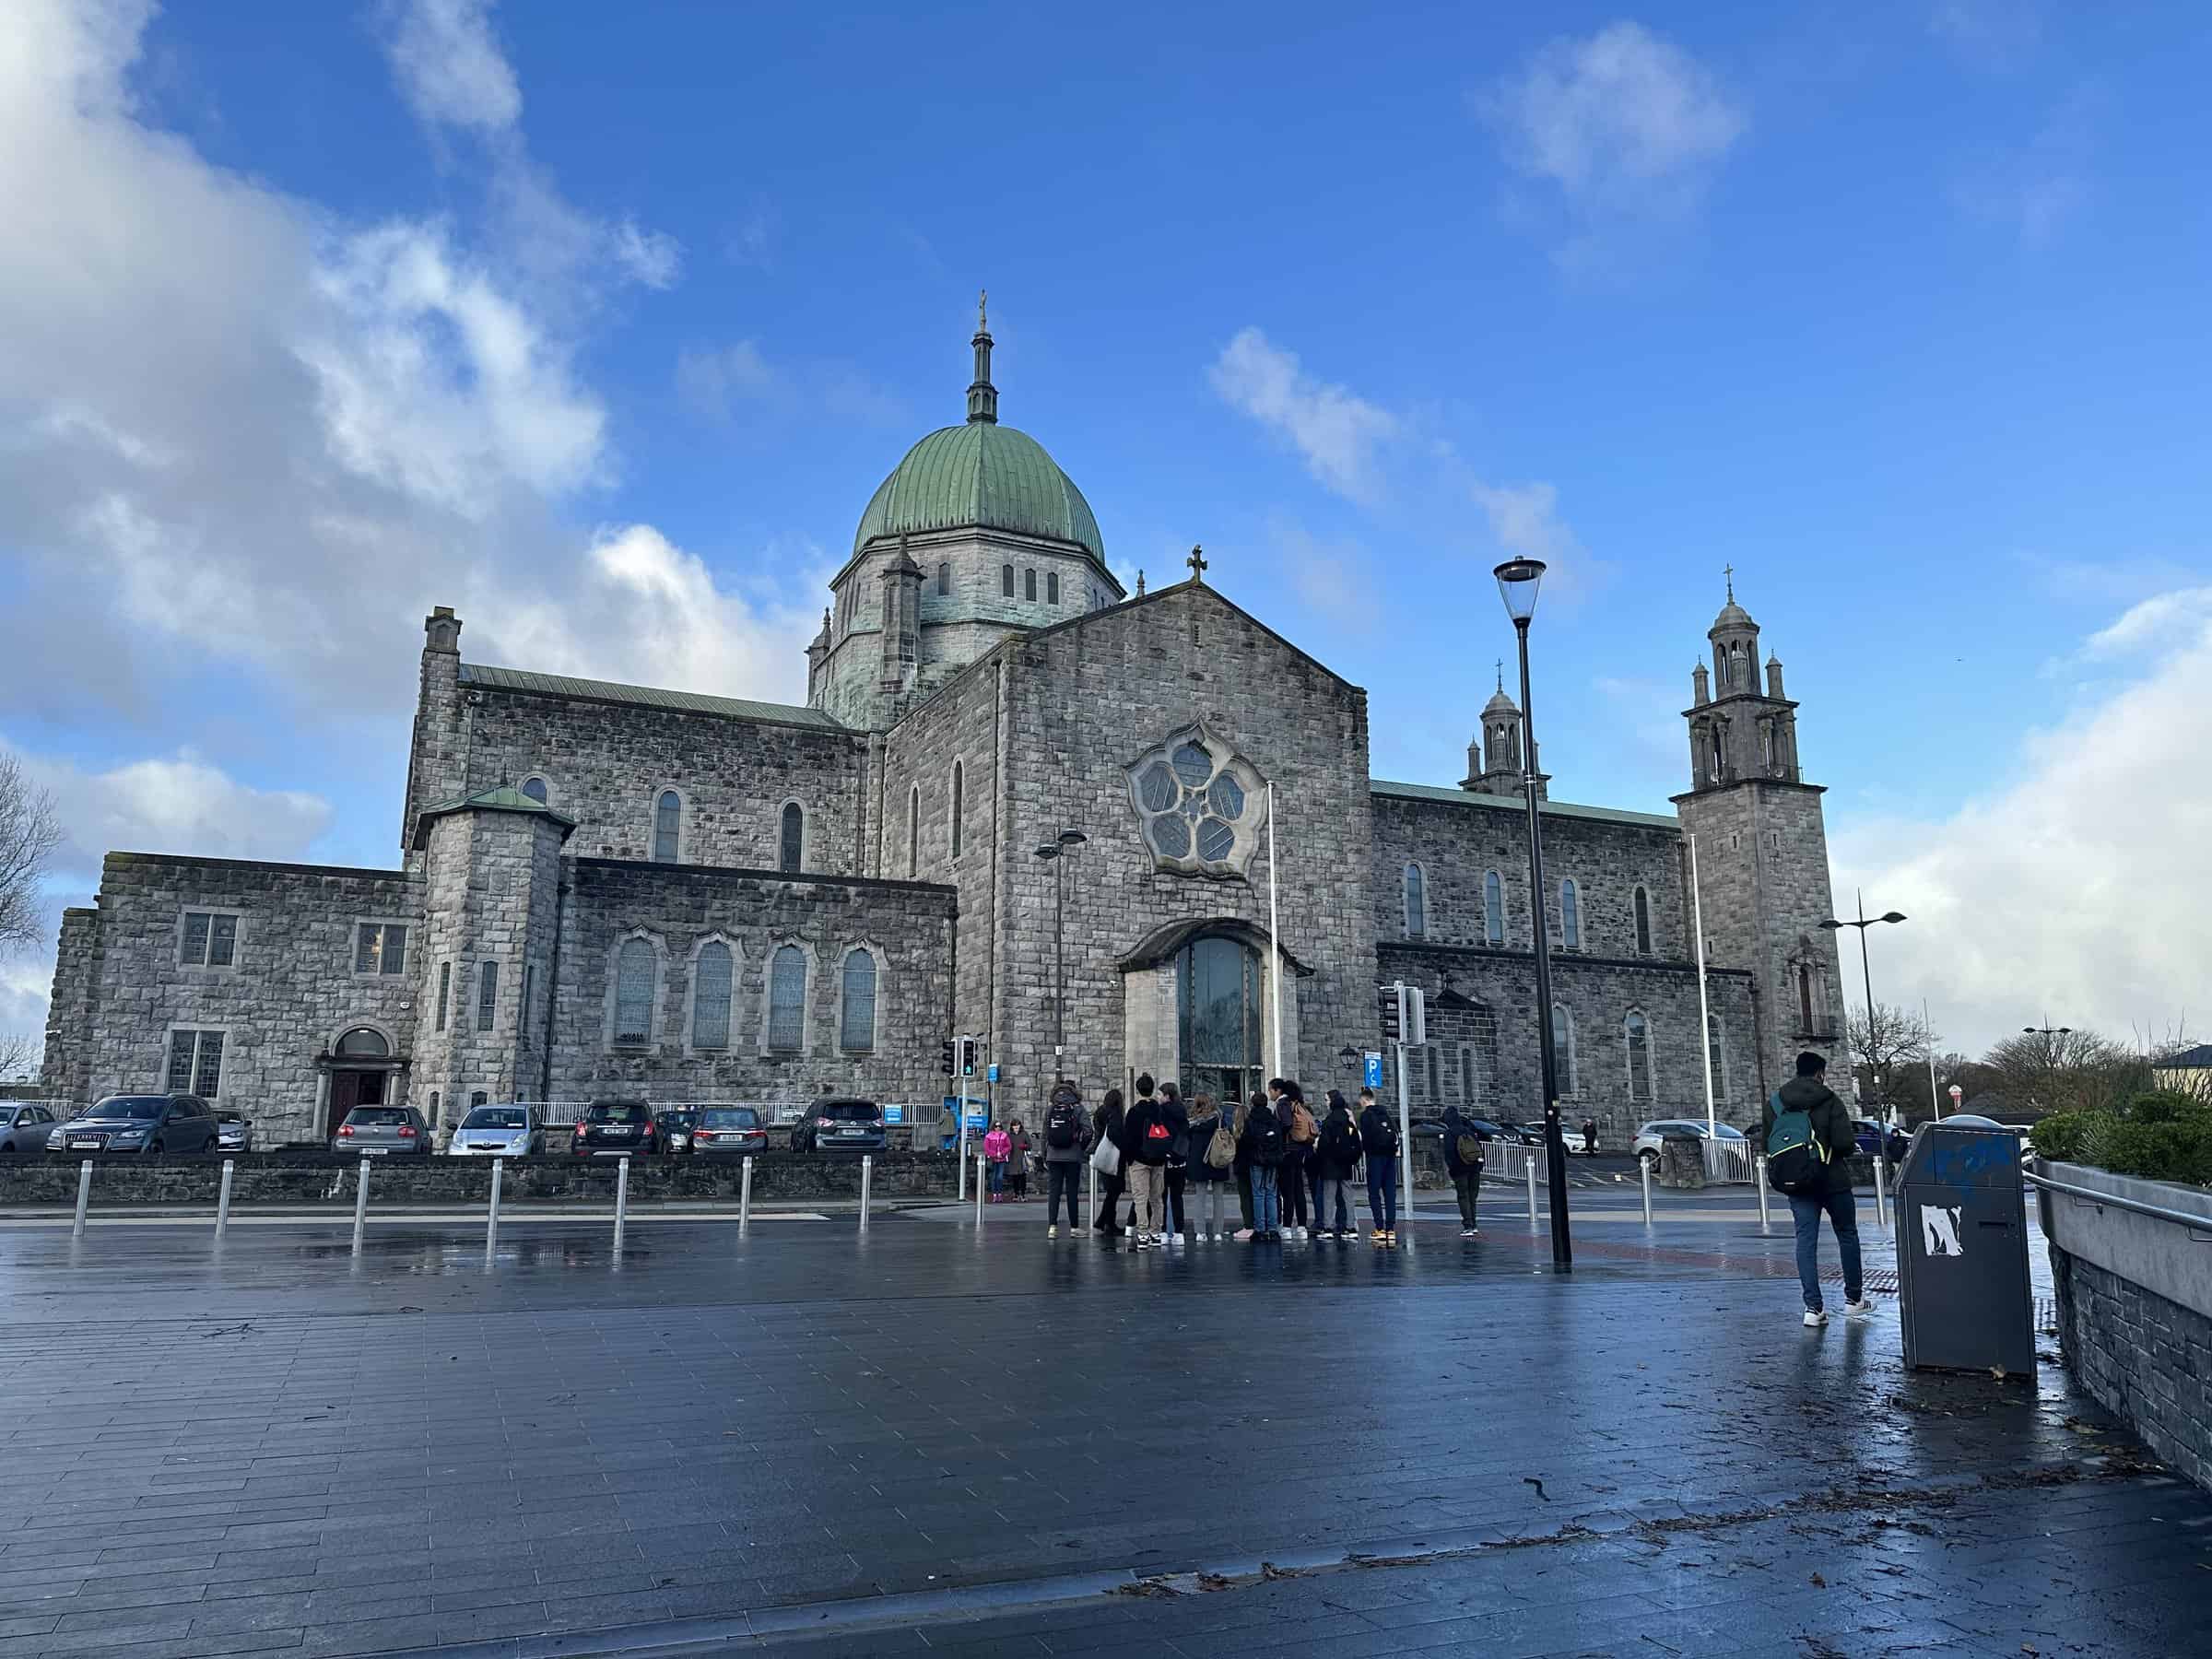 The Galway Cathedral with its impressive stone architecture and green dome stands under a partly cloudy sky, as pedestrians walk by the wet pavement reflecting the bright, scattered clouds after a rain shower in Galway, Ireland.